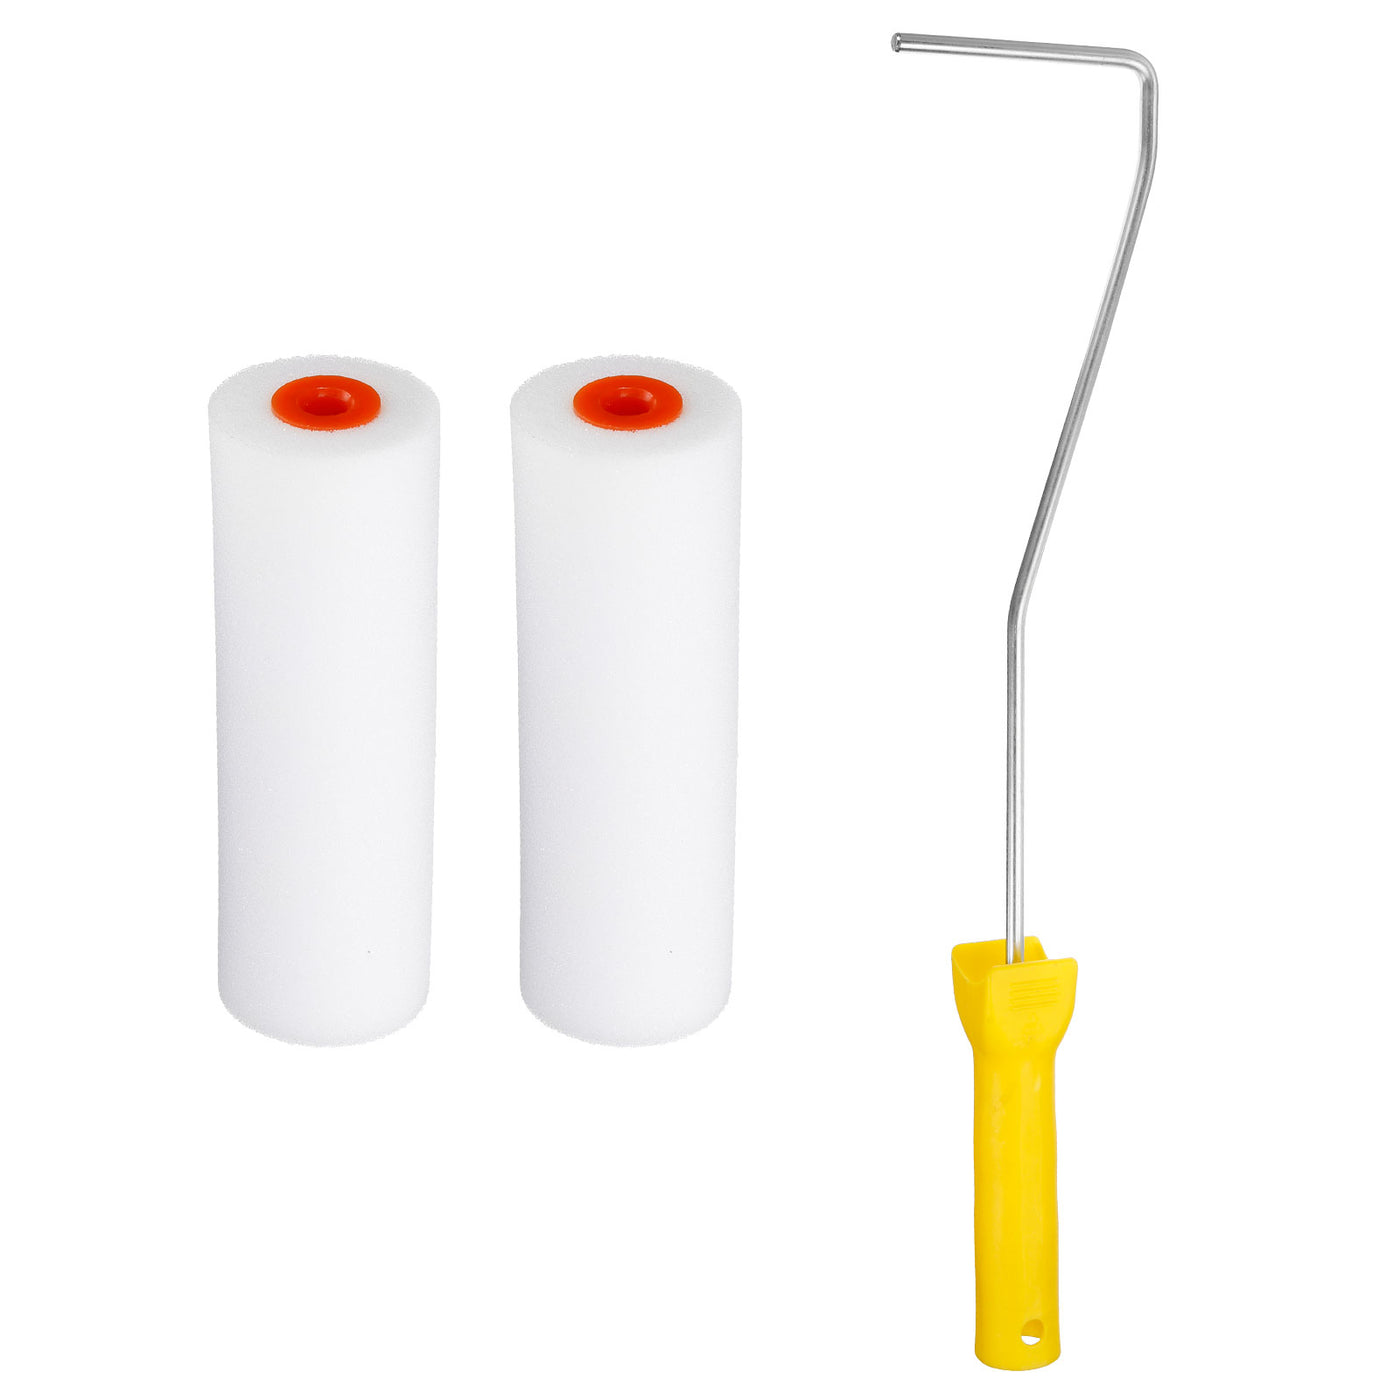 uxcell Uxcell 3Pcs Paint Roller Set, 2Pcs 4" Water Based Sponge Roller Covers and 23" Paint Roller Frame